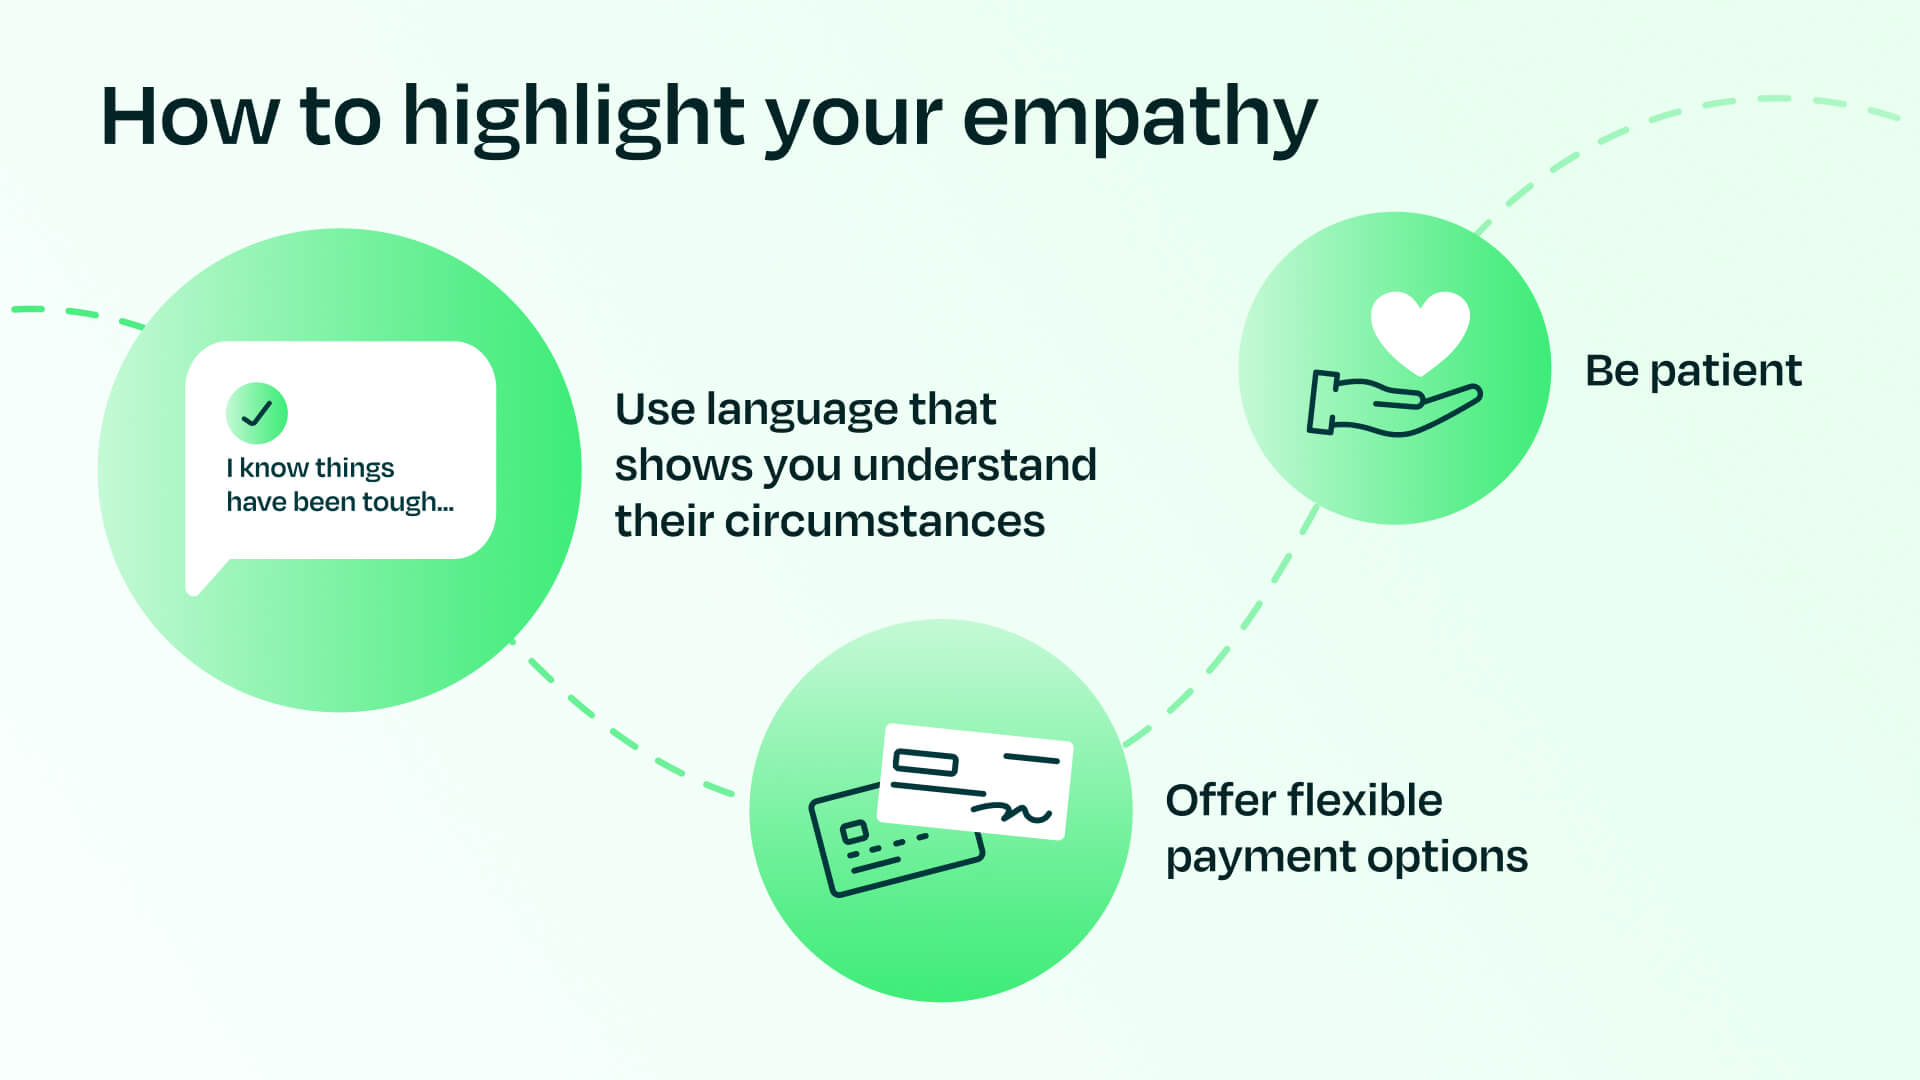 How to highlight your empathy tips chart